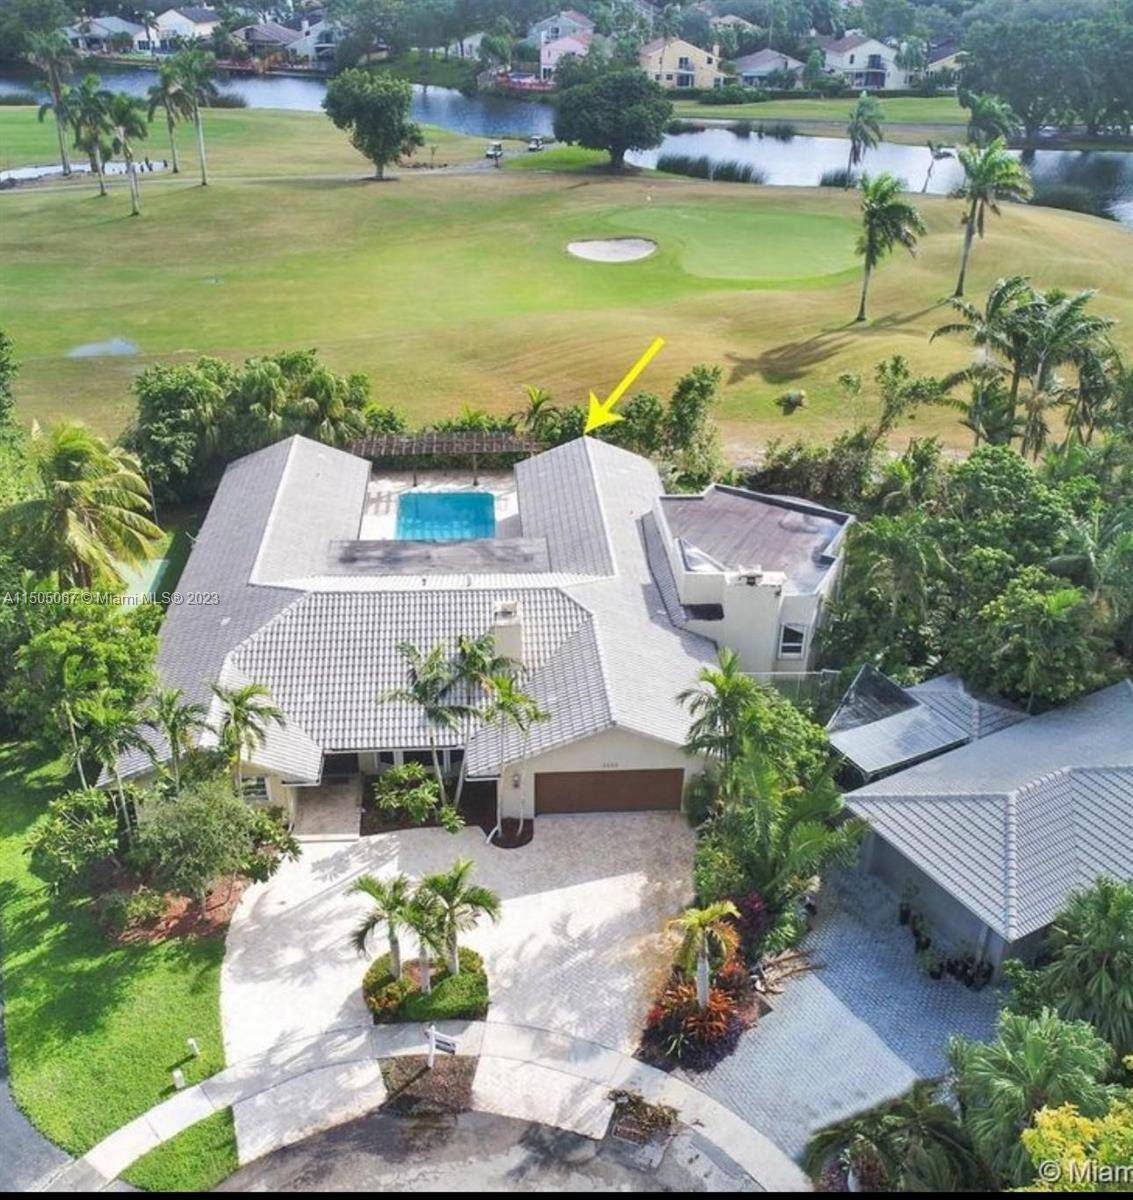 Exquisite Emerald Hills Masterpiece Villa 5, 200 sft on a private cul de sac completely renovated with golf course views offered at 2, 649, 000.